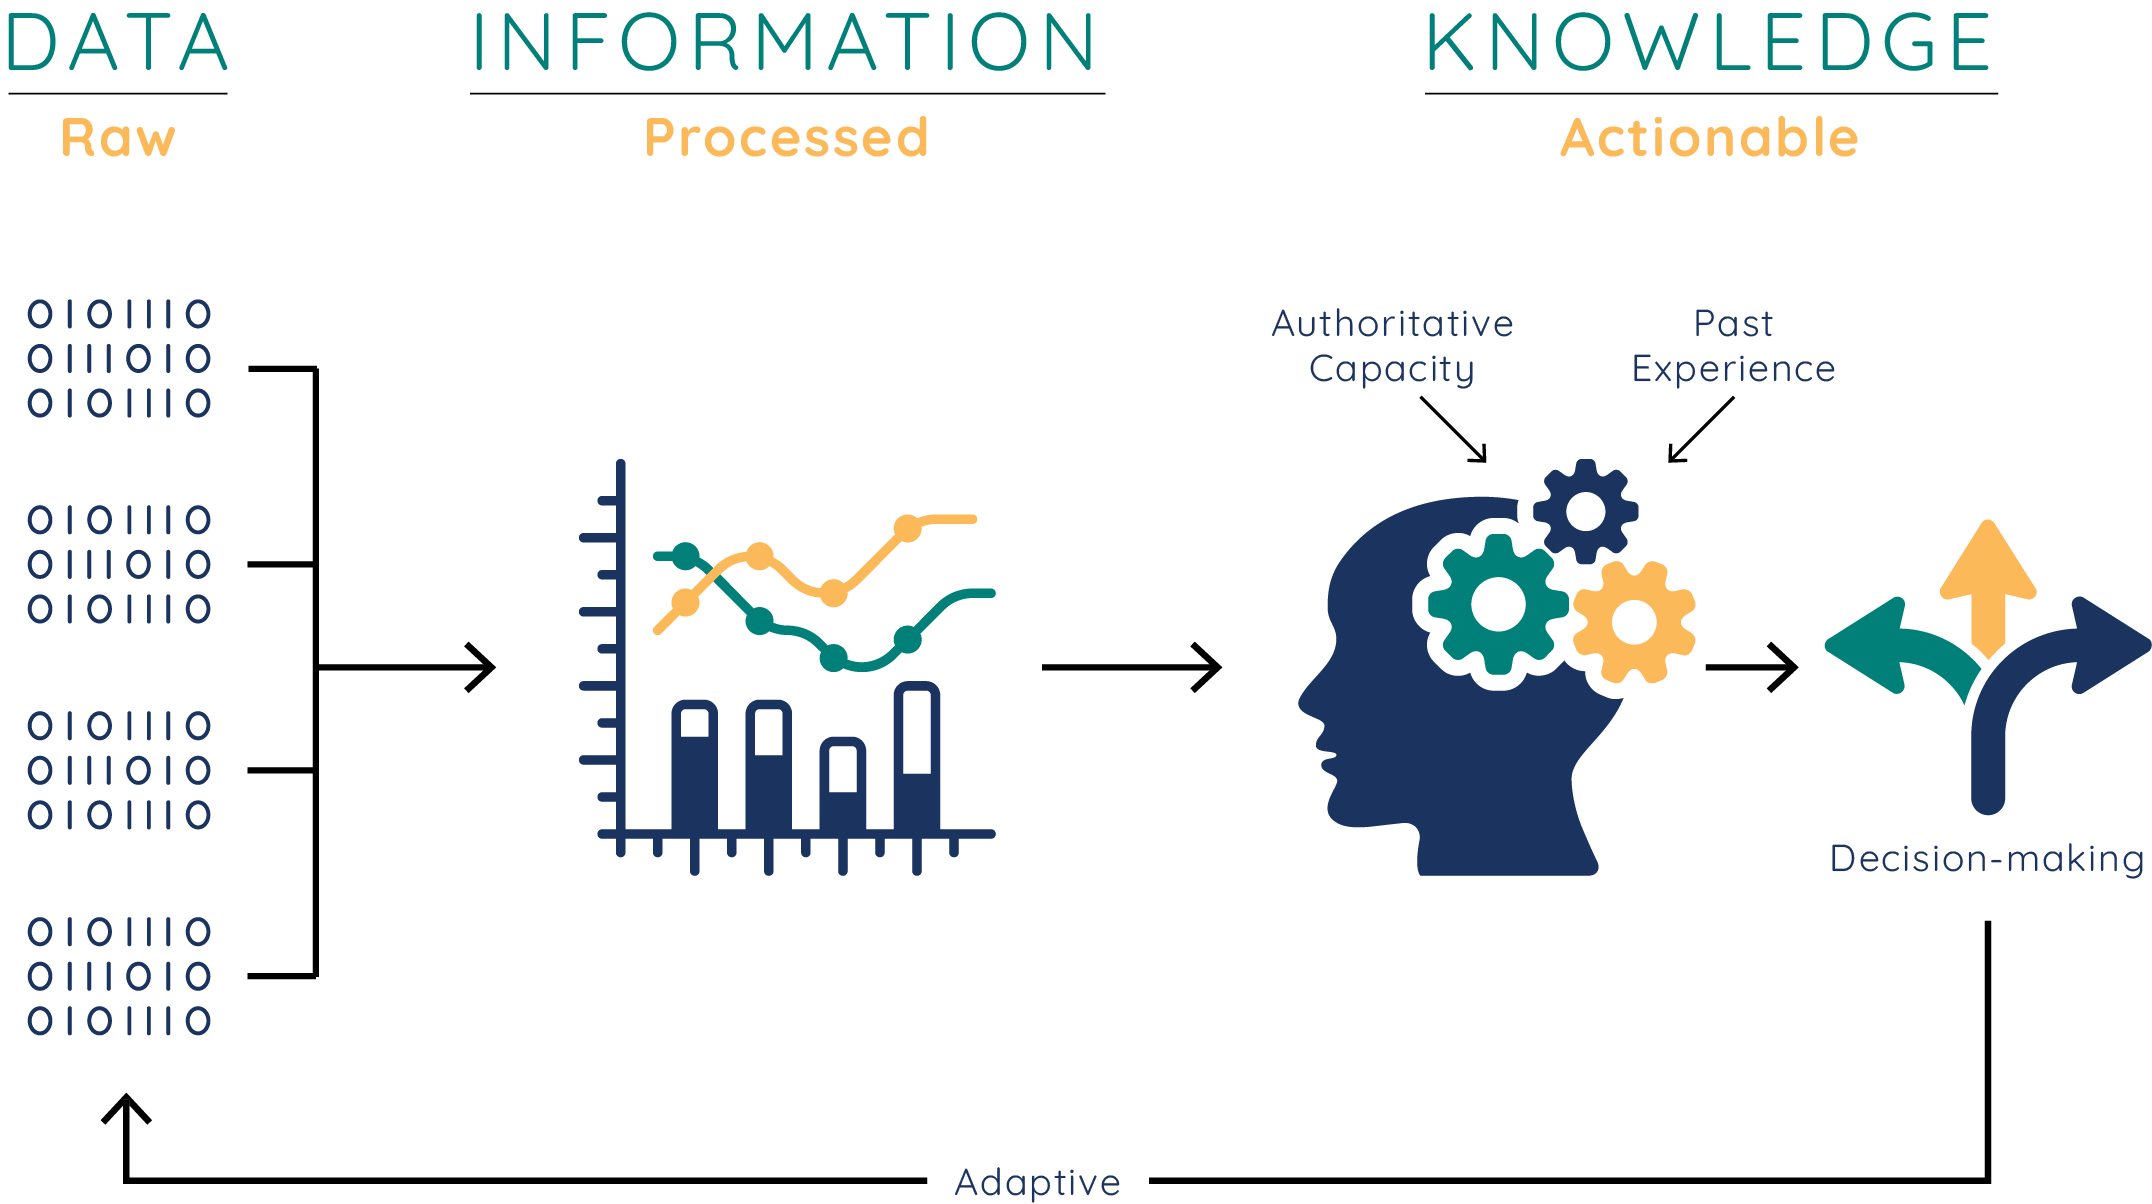 Data Information and Knowledge